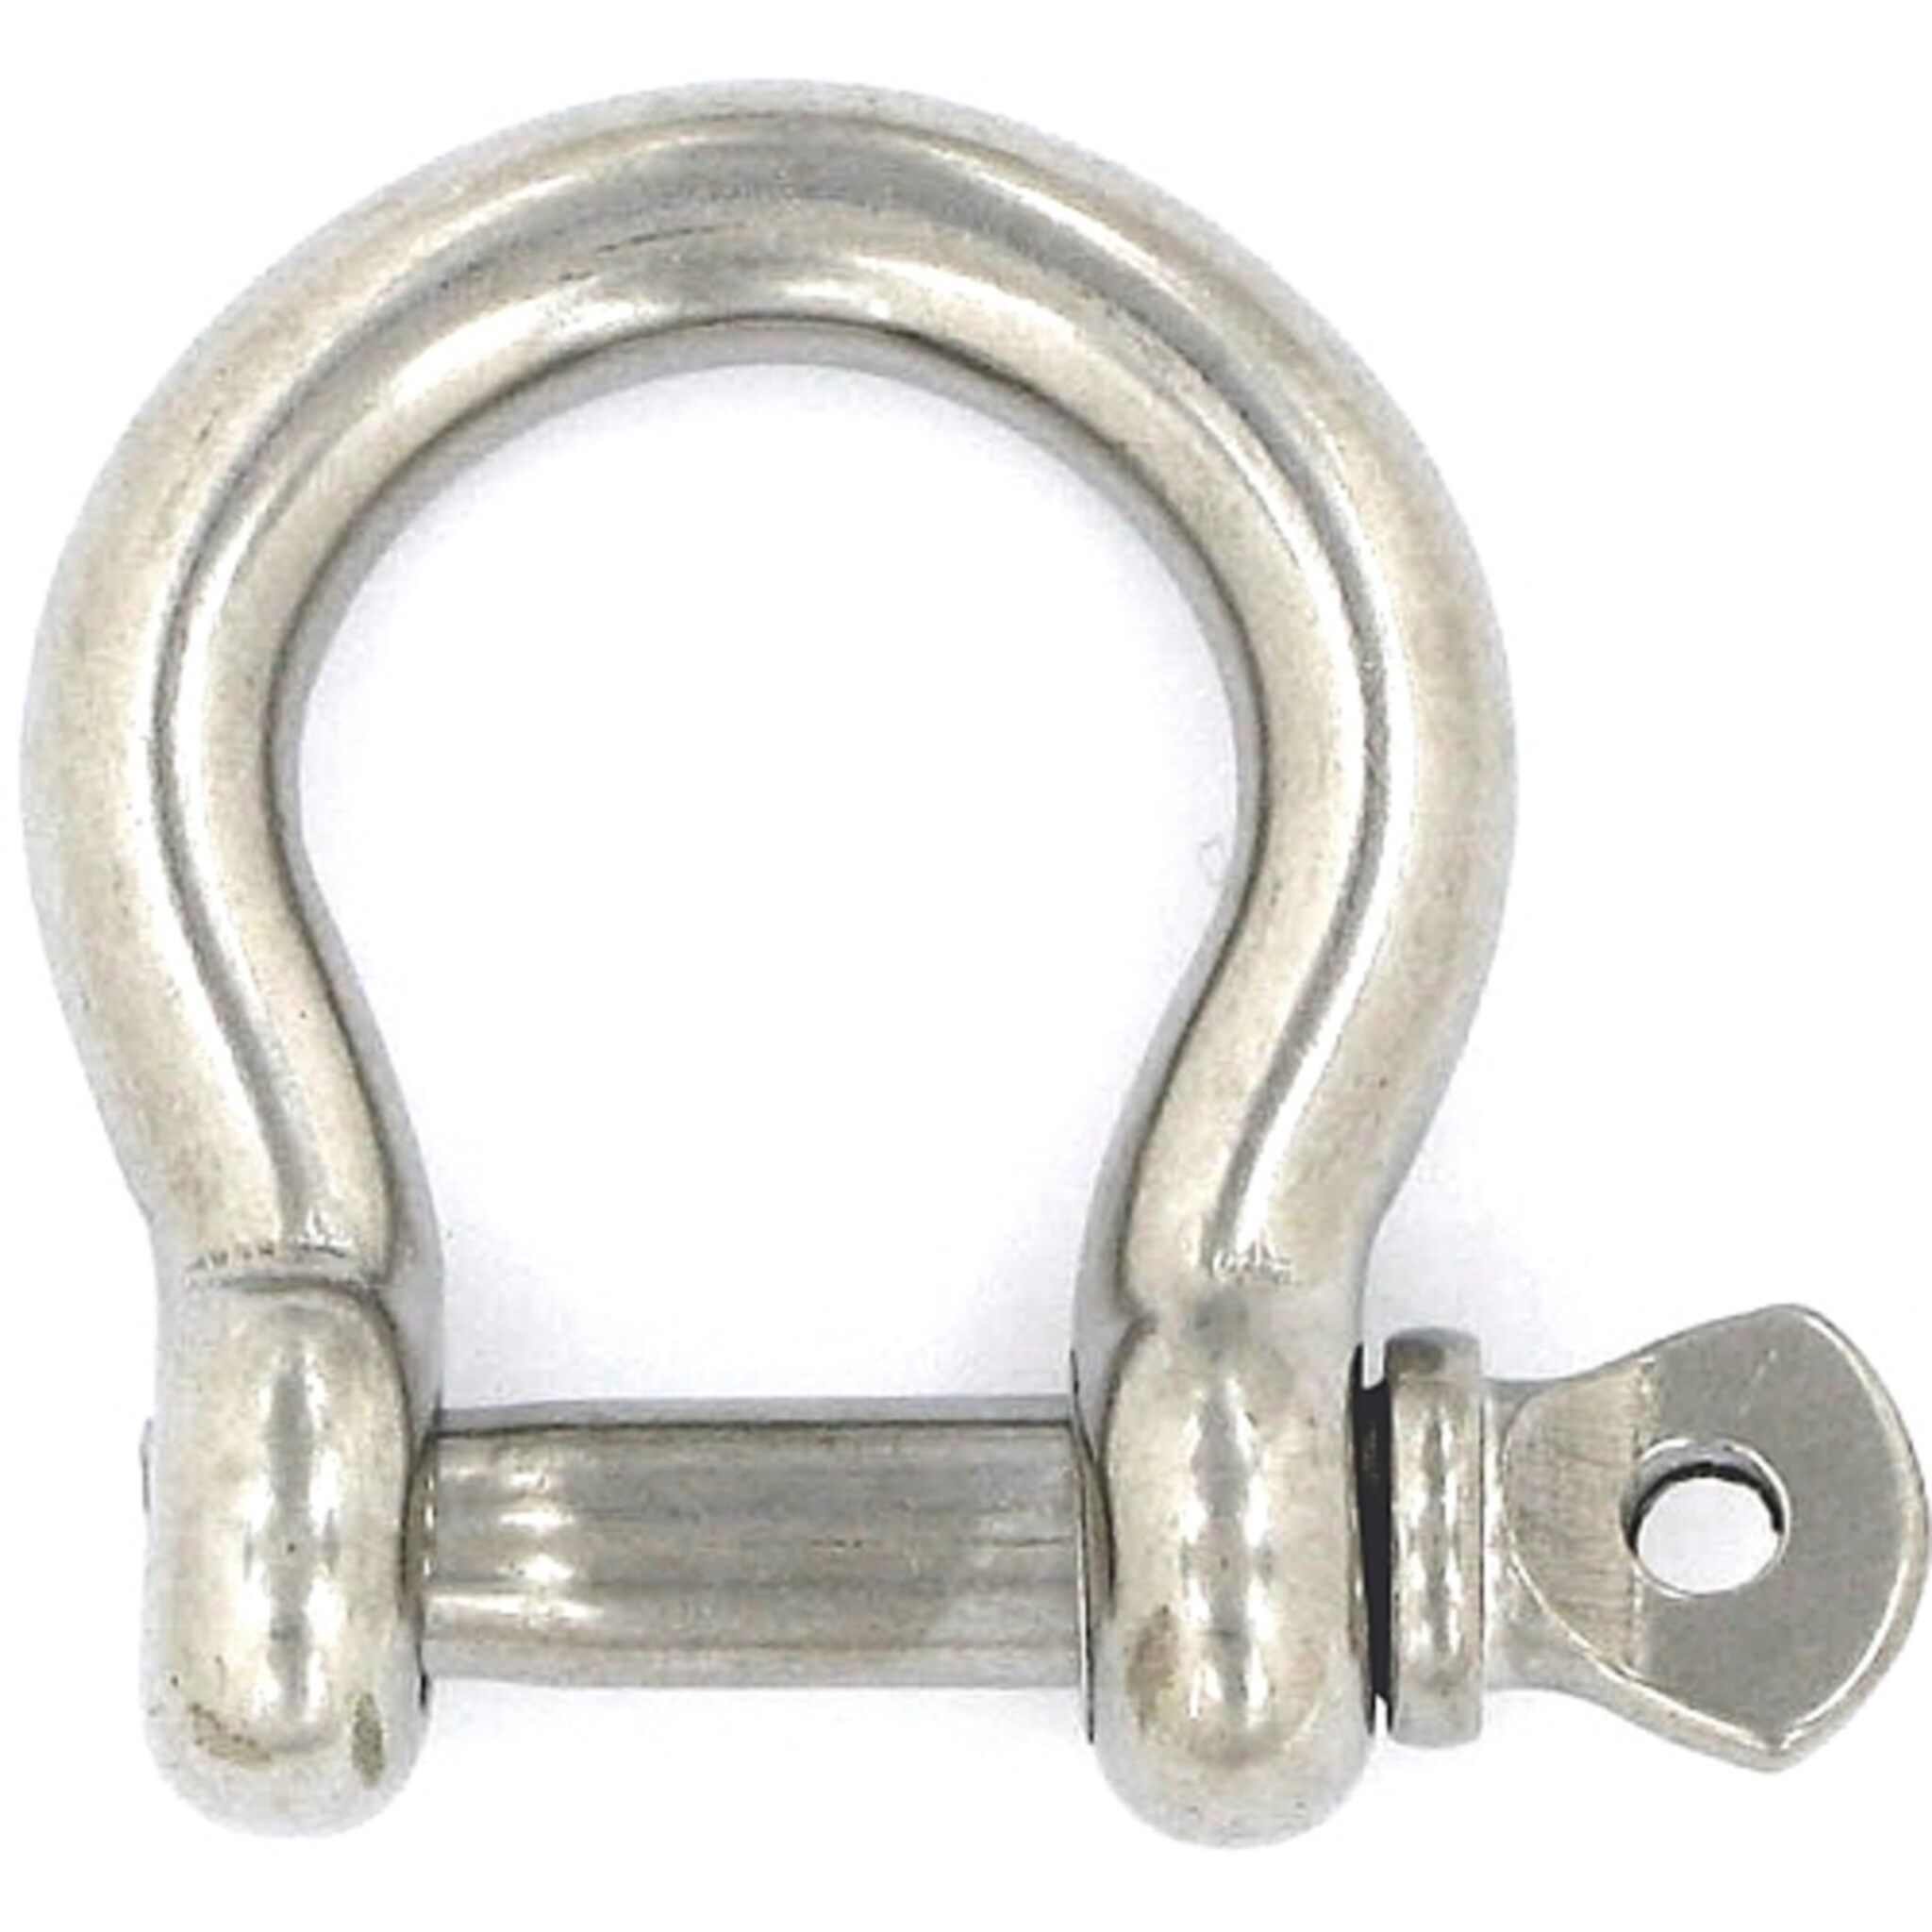 Shackle curved